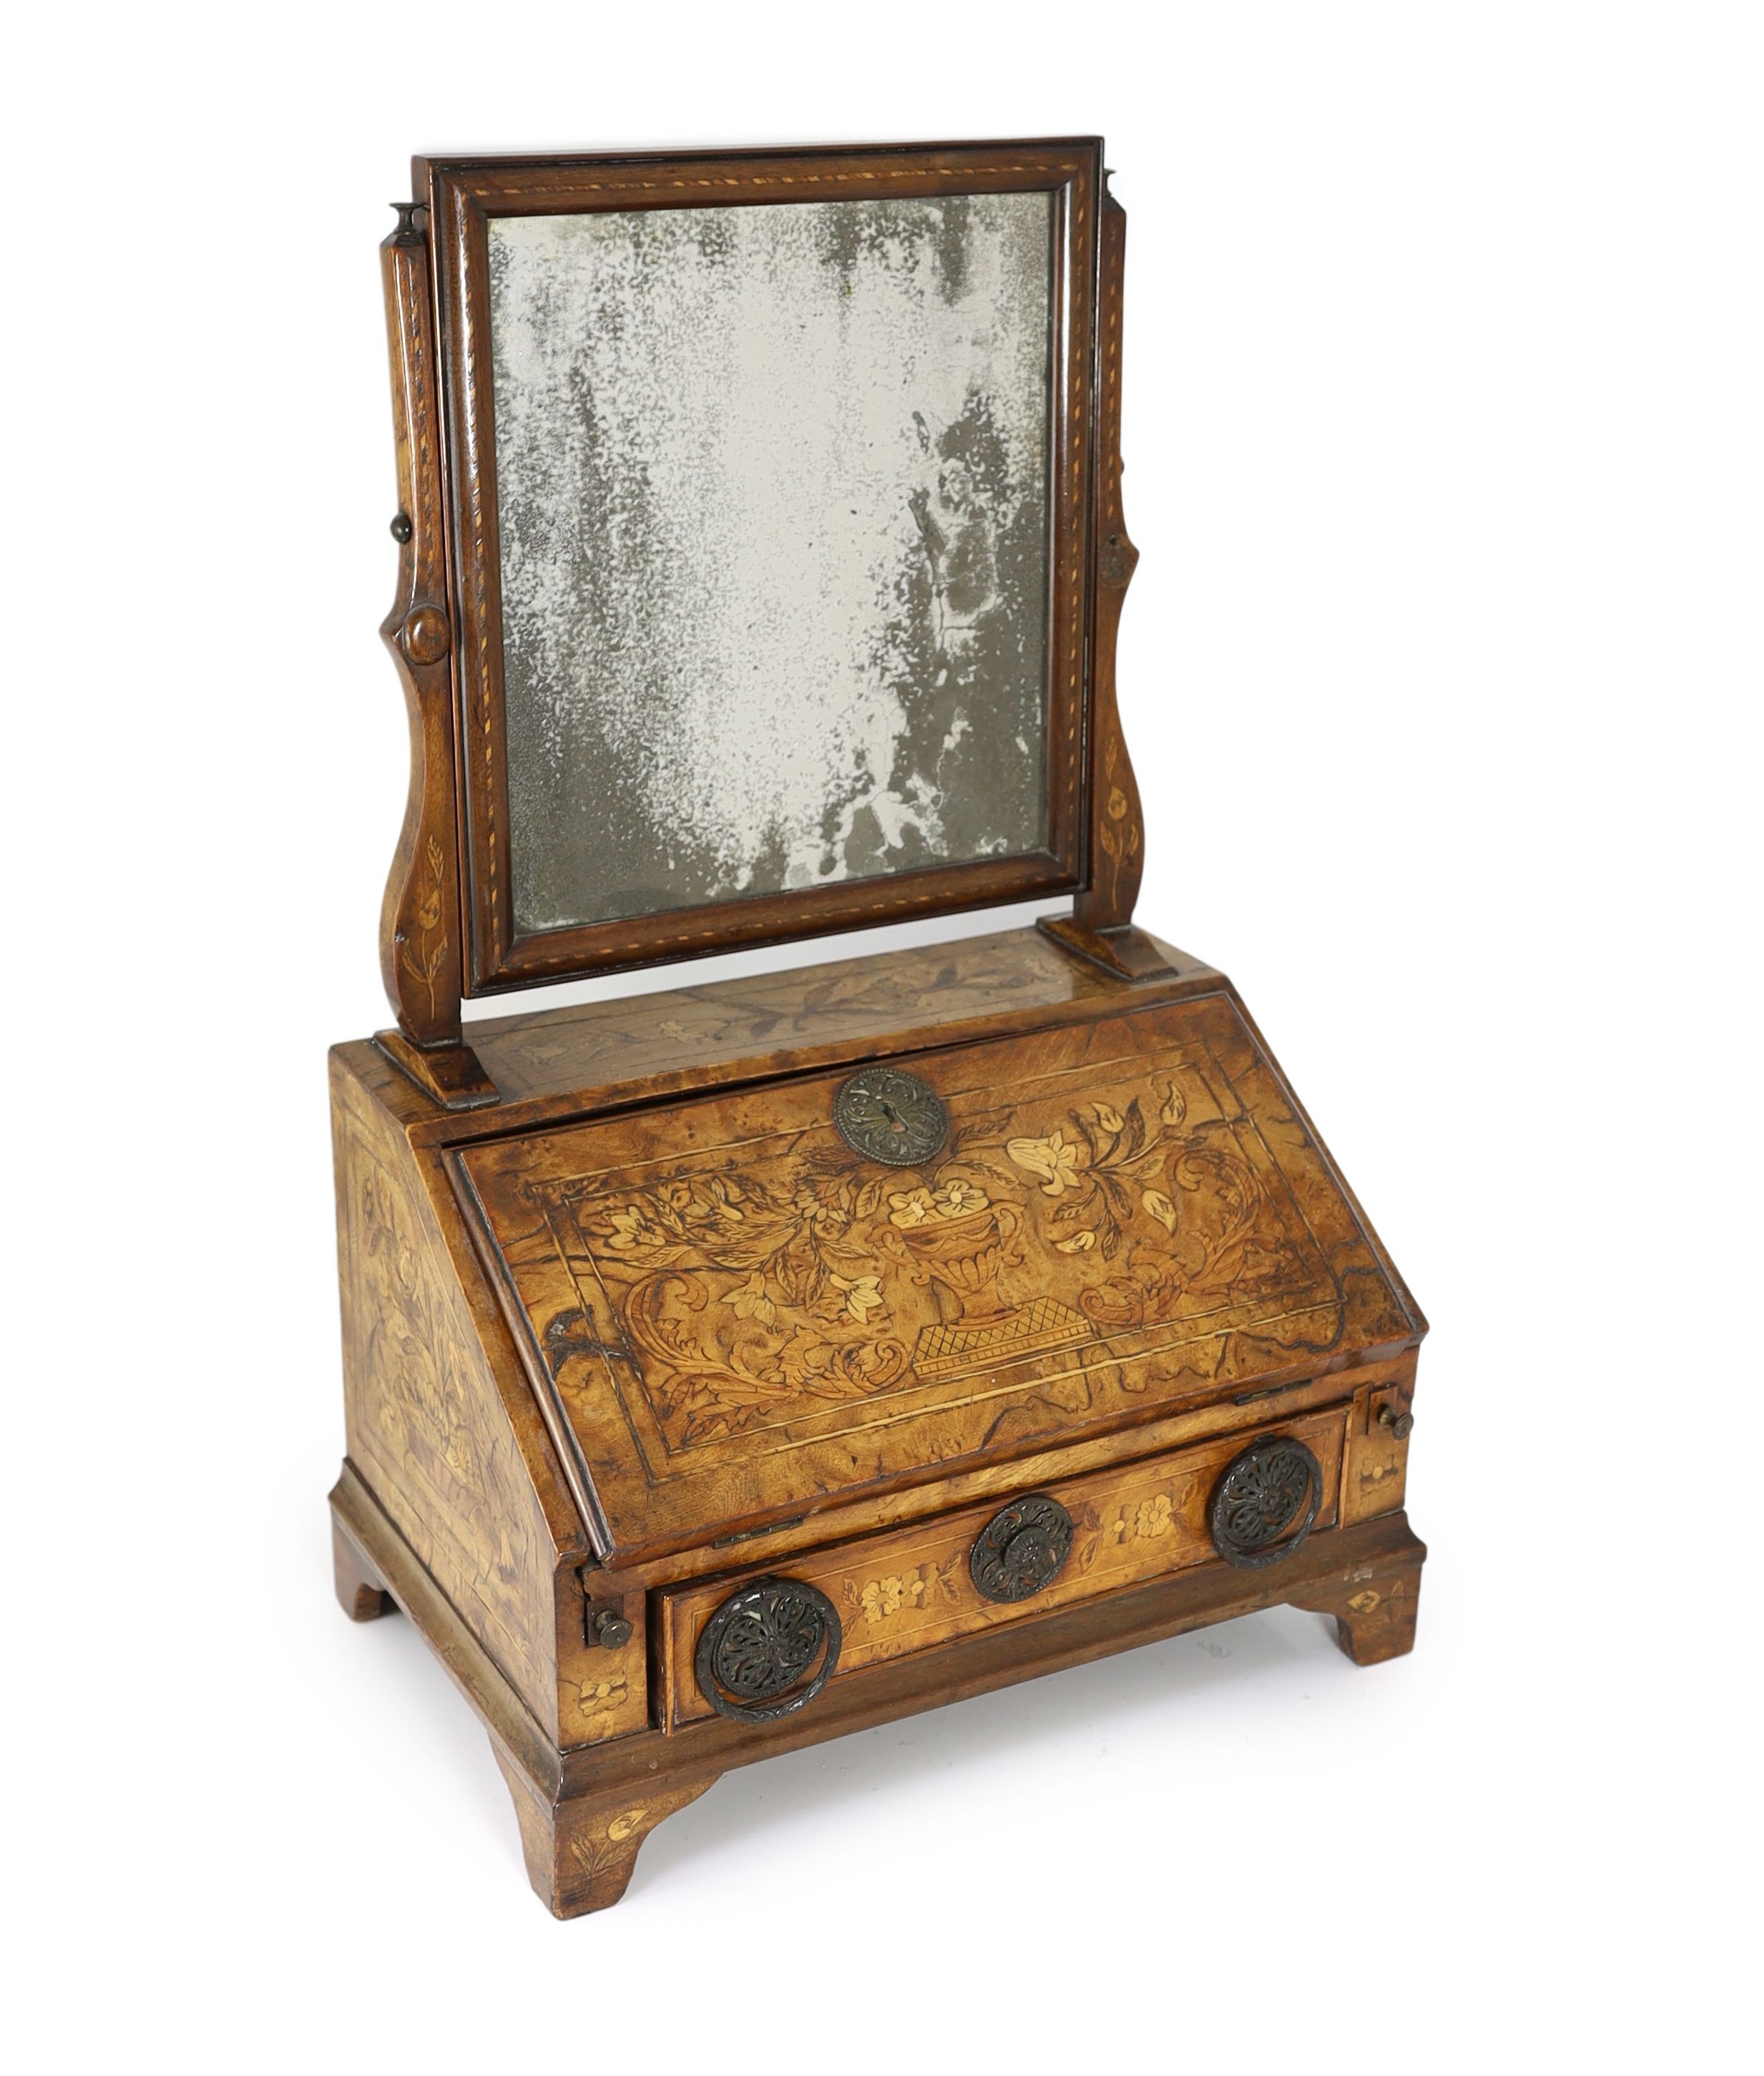 A mid to late 18th century Dutch walnut and marquetry toilet mirror bureau